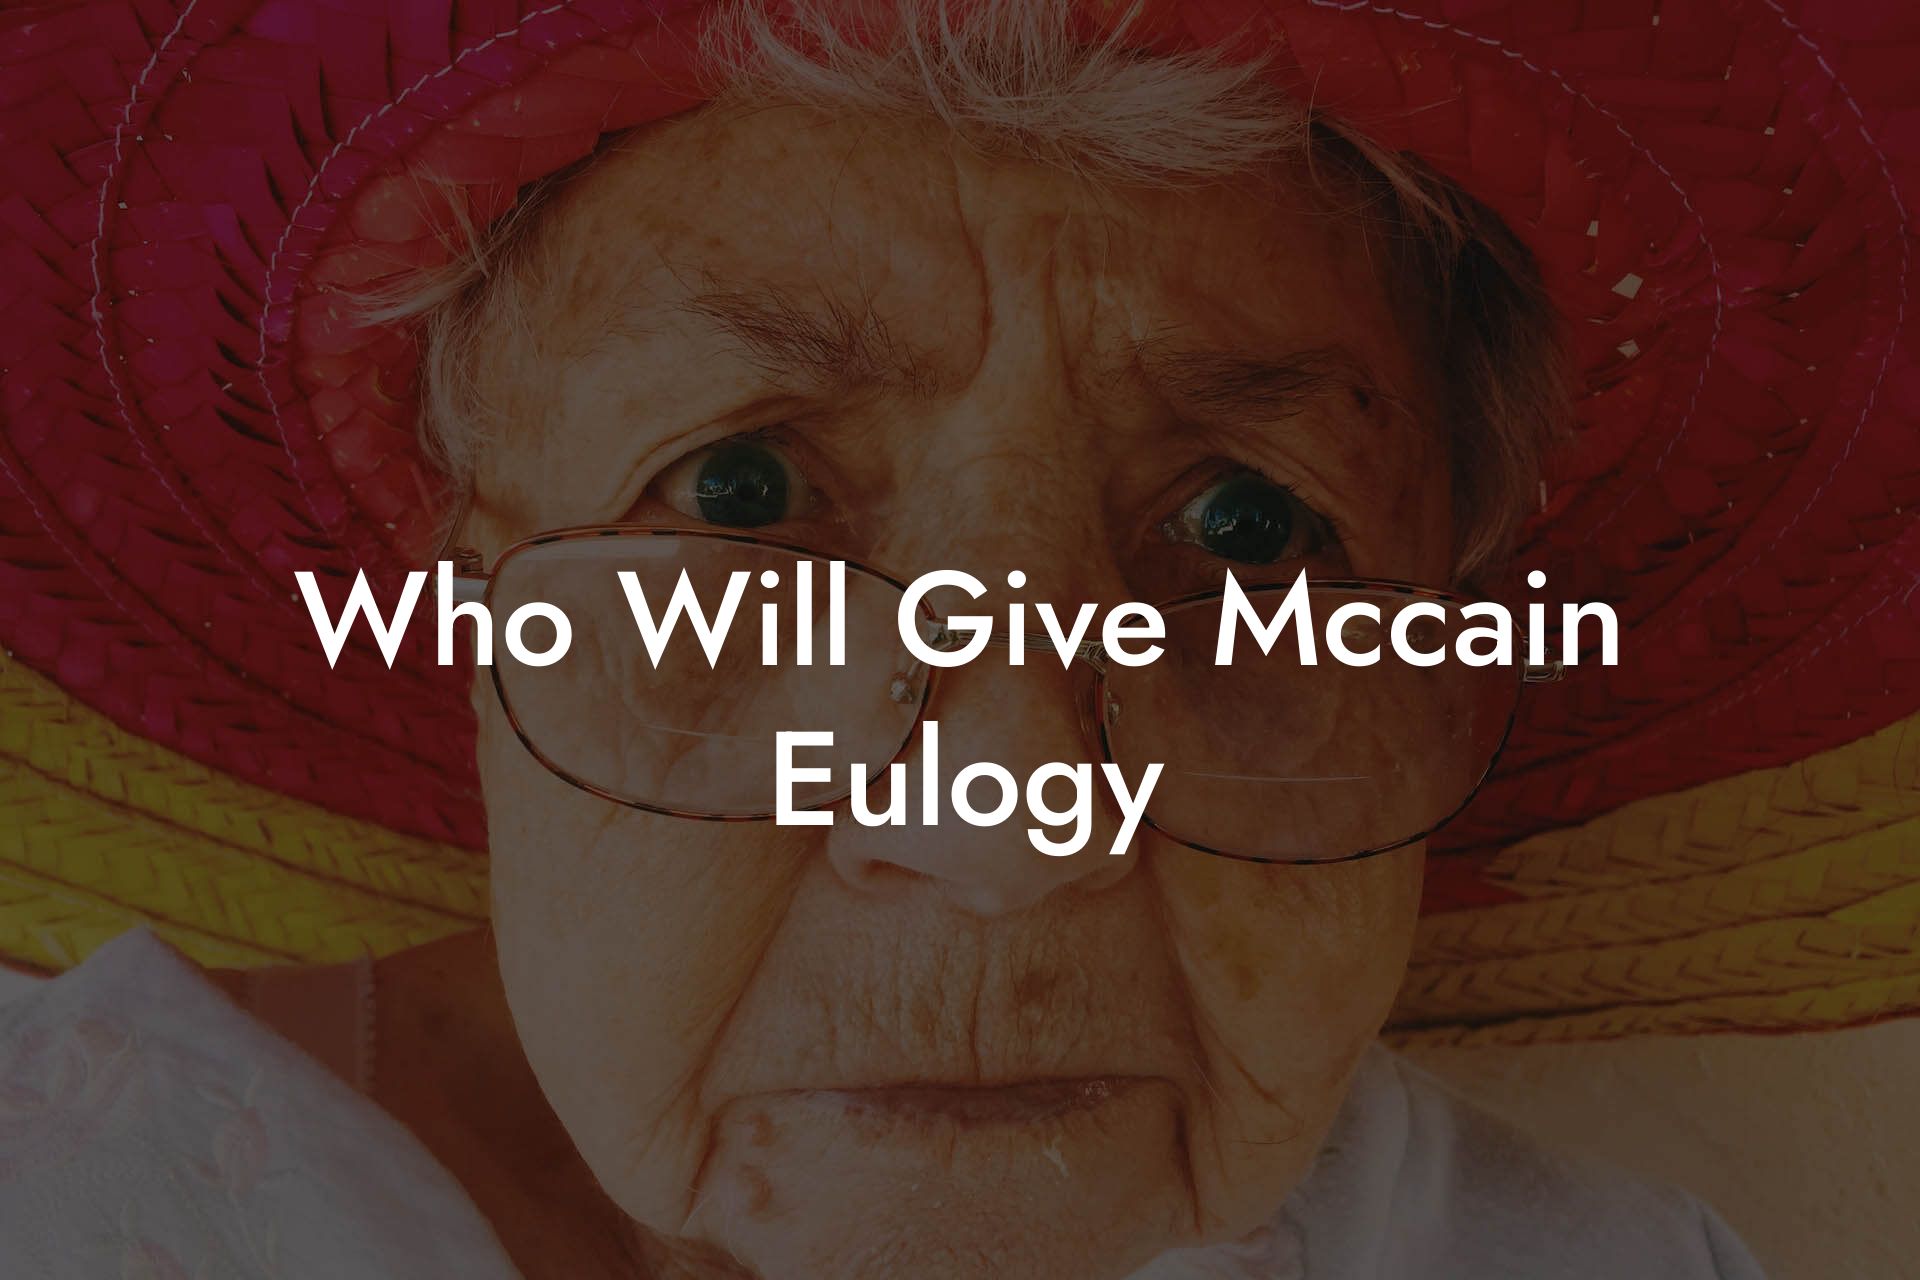 Who Will Give Mccain Eulogy